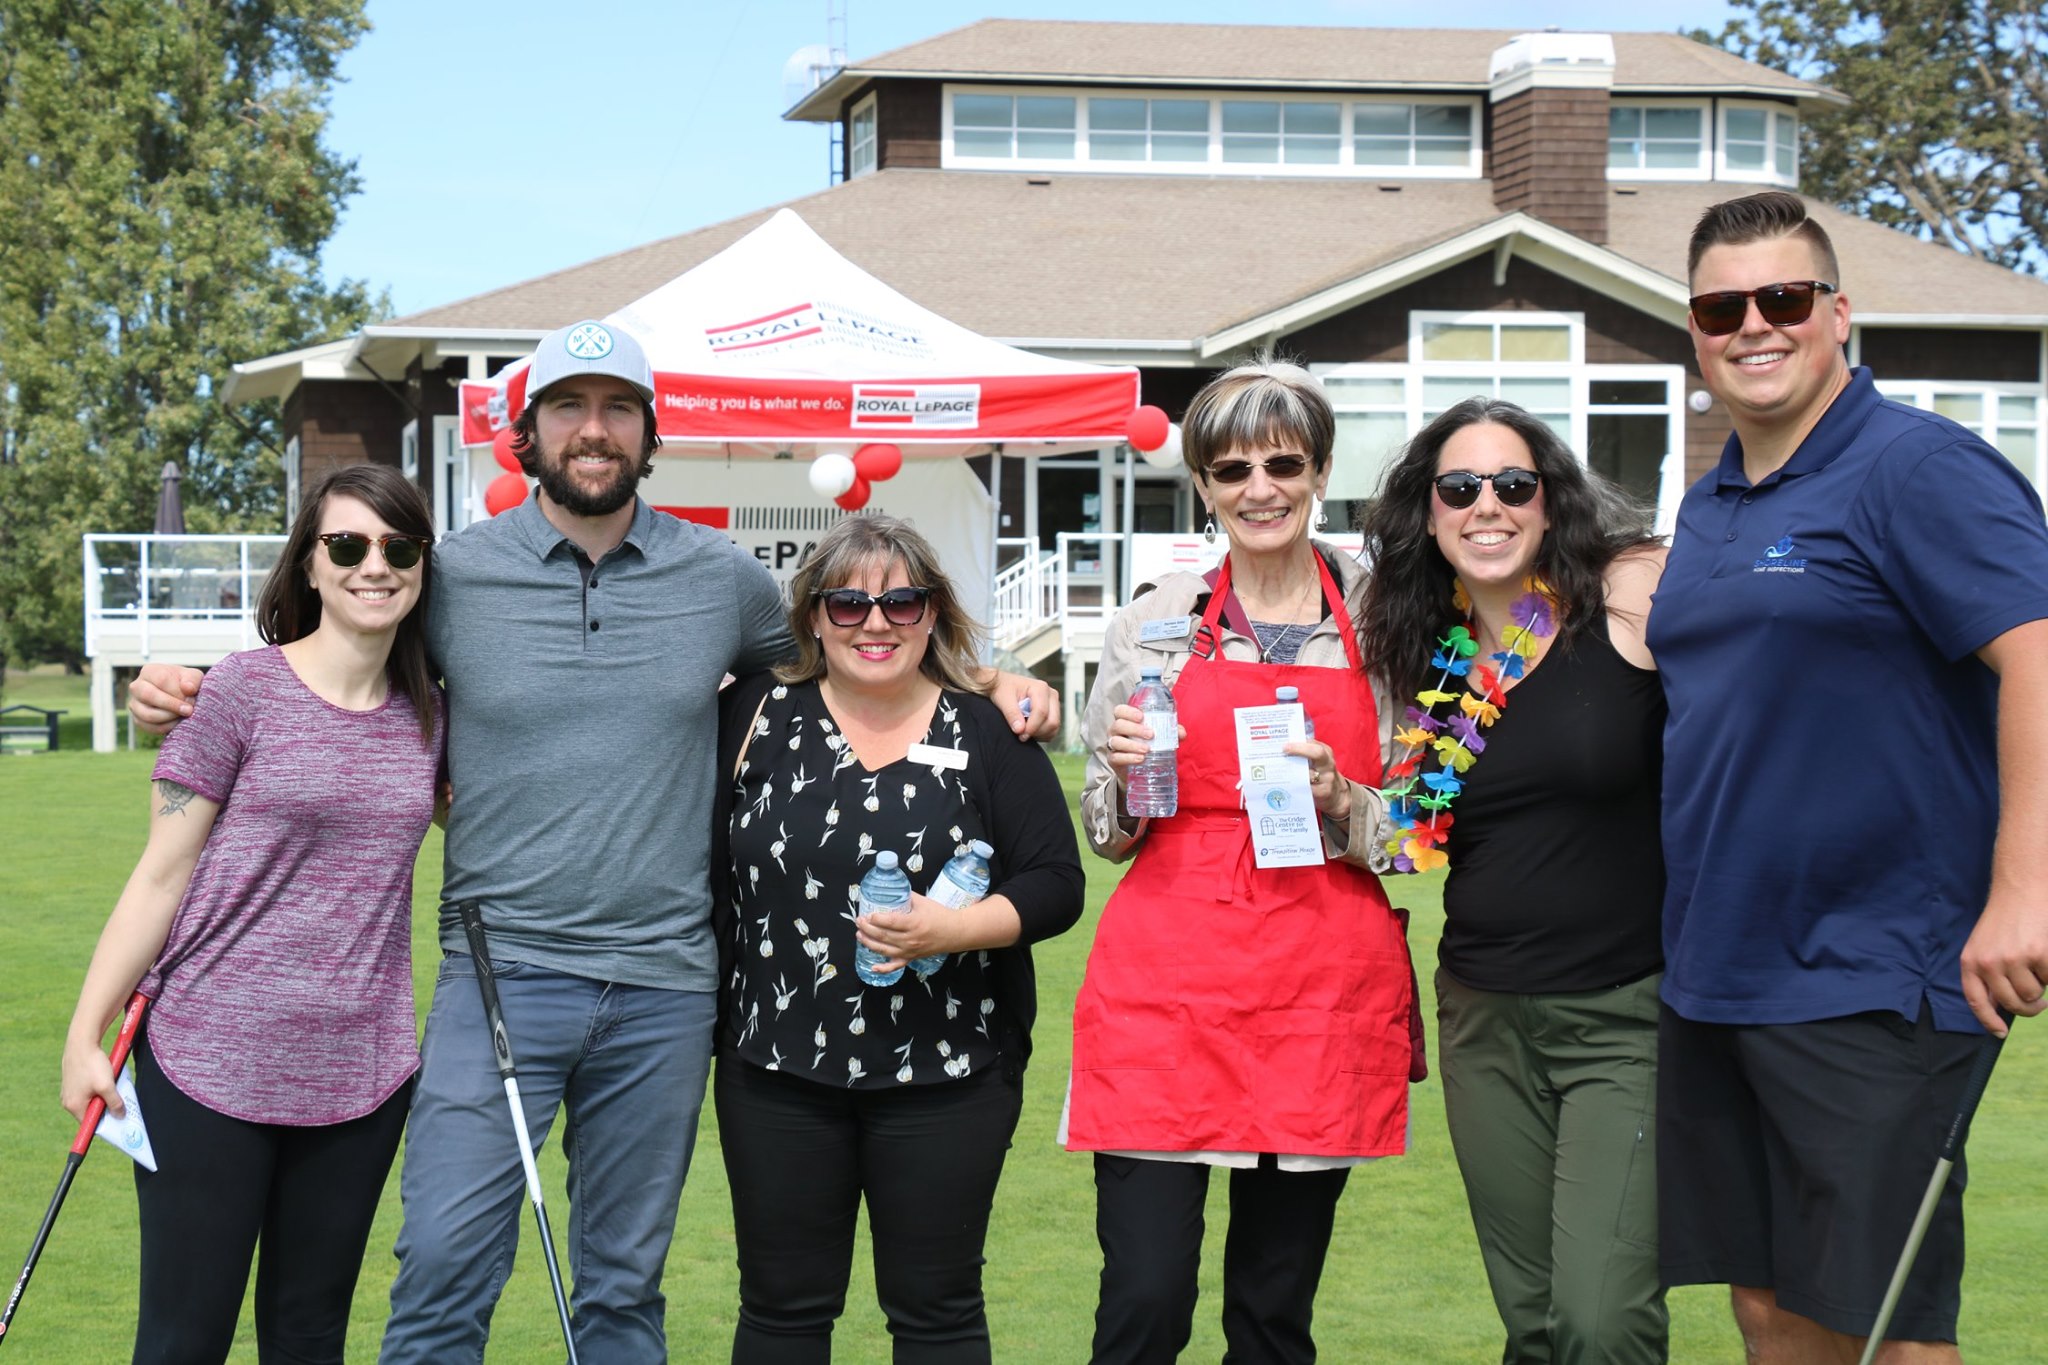 L-R at Golf 4 Shelter in support of the Royal LePage Shelter Foundation: Chelsea Hall, Jonny Vernon, Candace Stretch, Marlene Goley, Lindsay Block-Glass, and Reece Jacob.